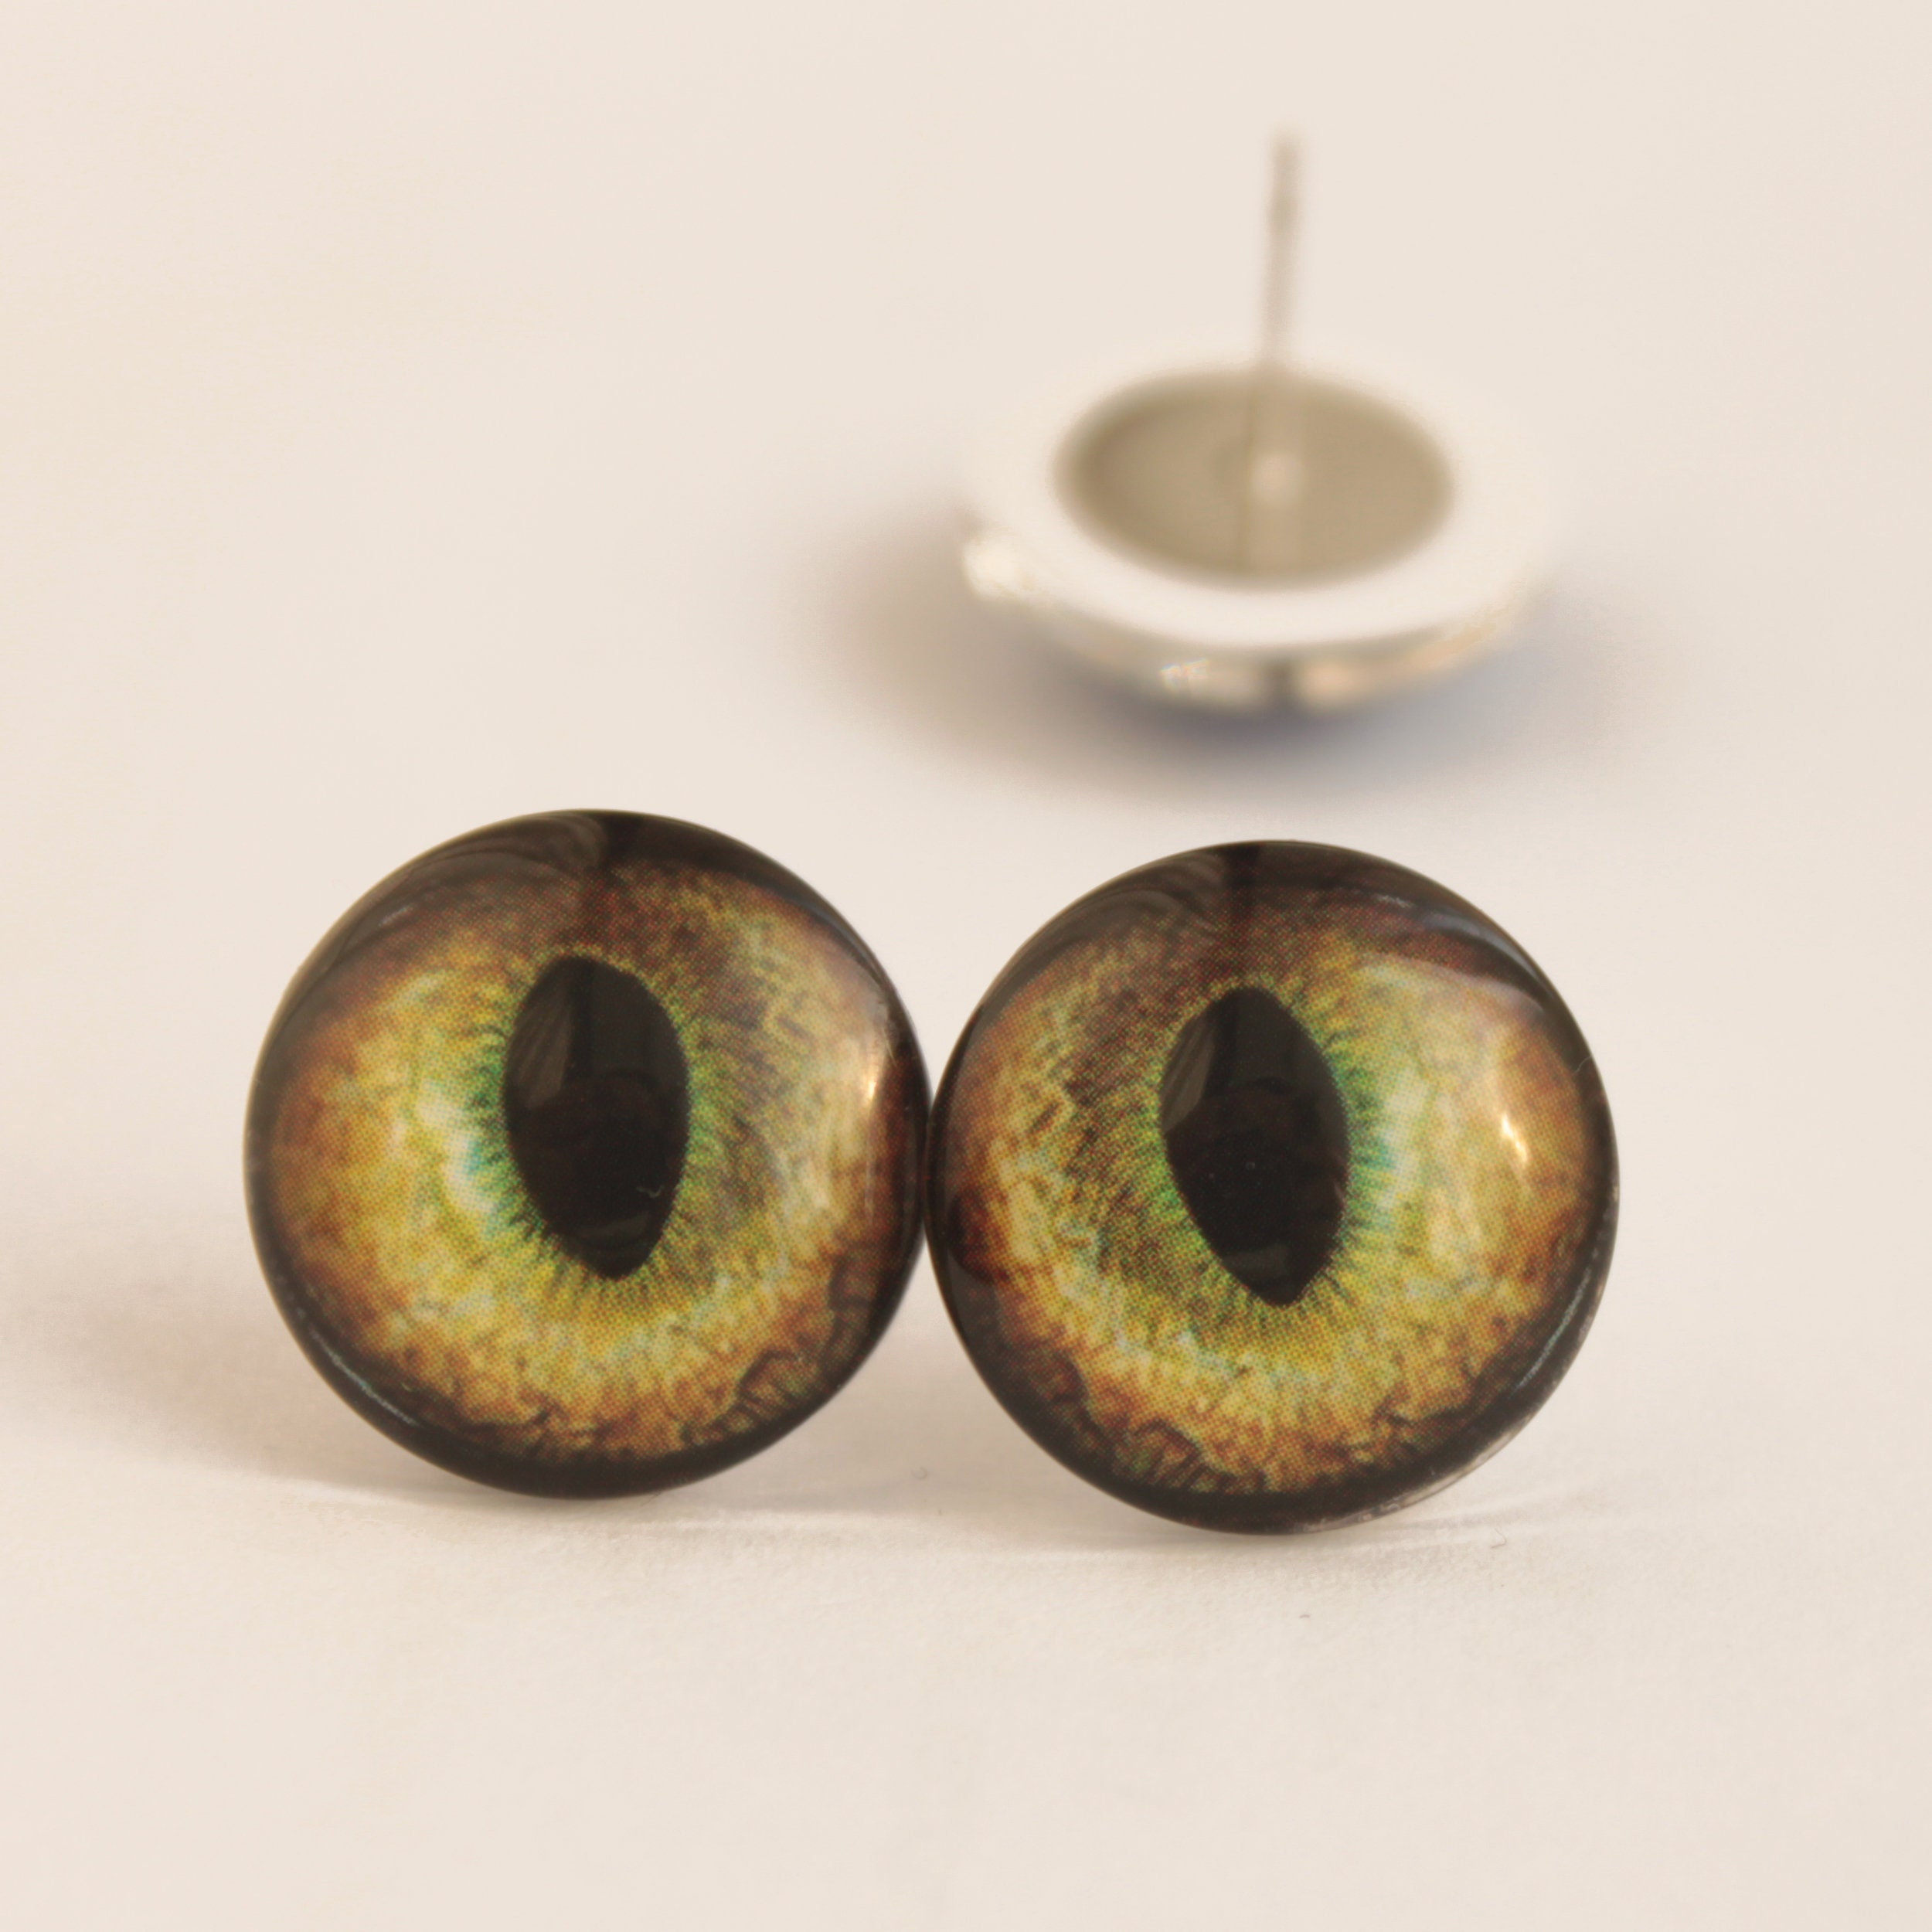  ZZBUY 100PCS 18MM Dragon Eyes for Crafts Realistic Cat